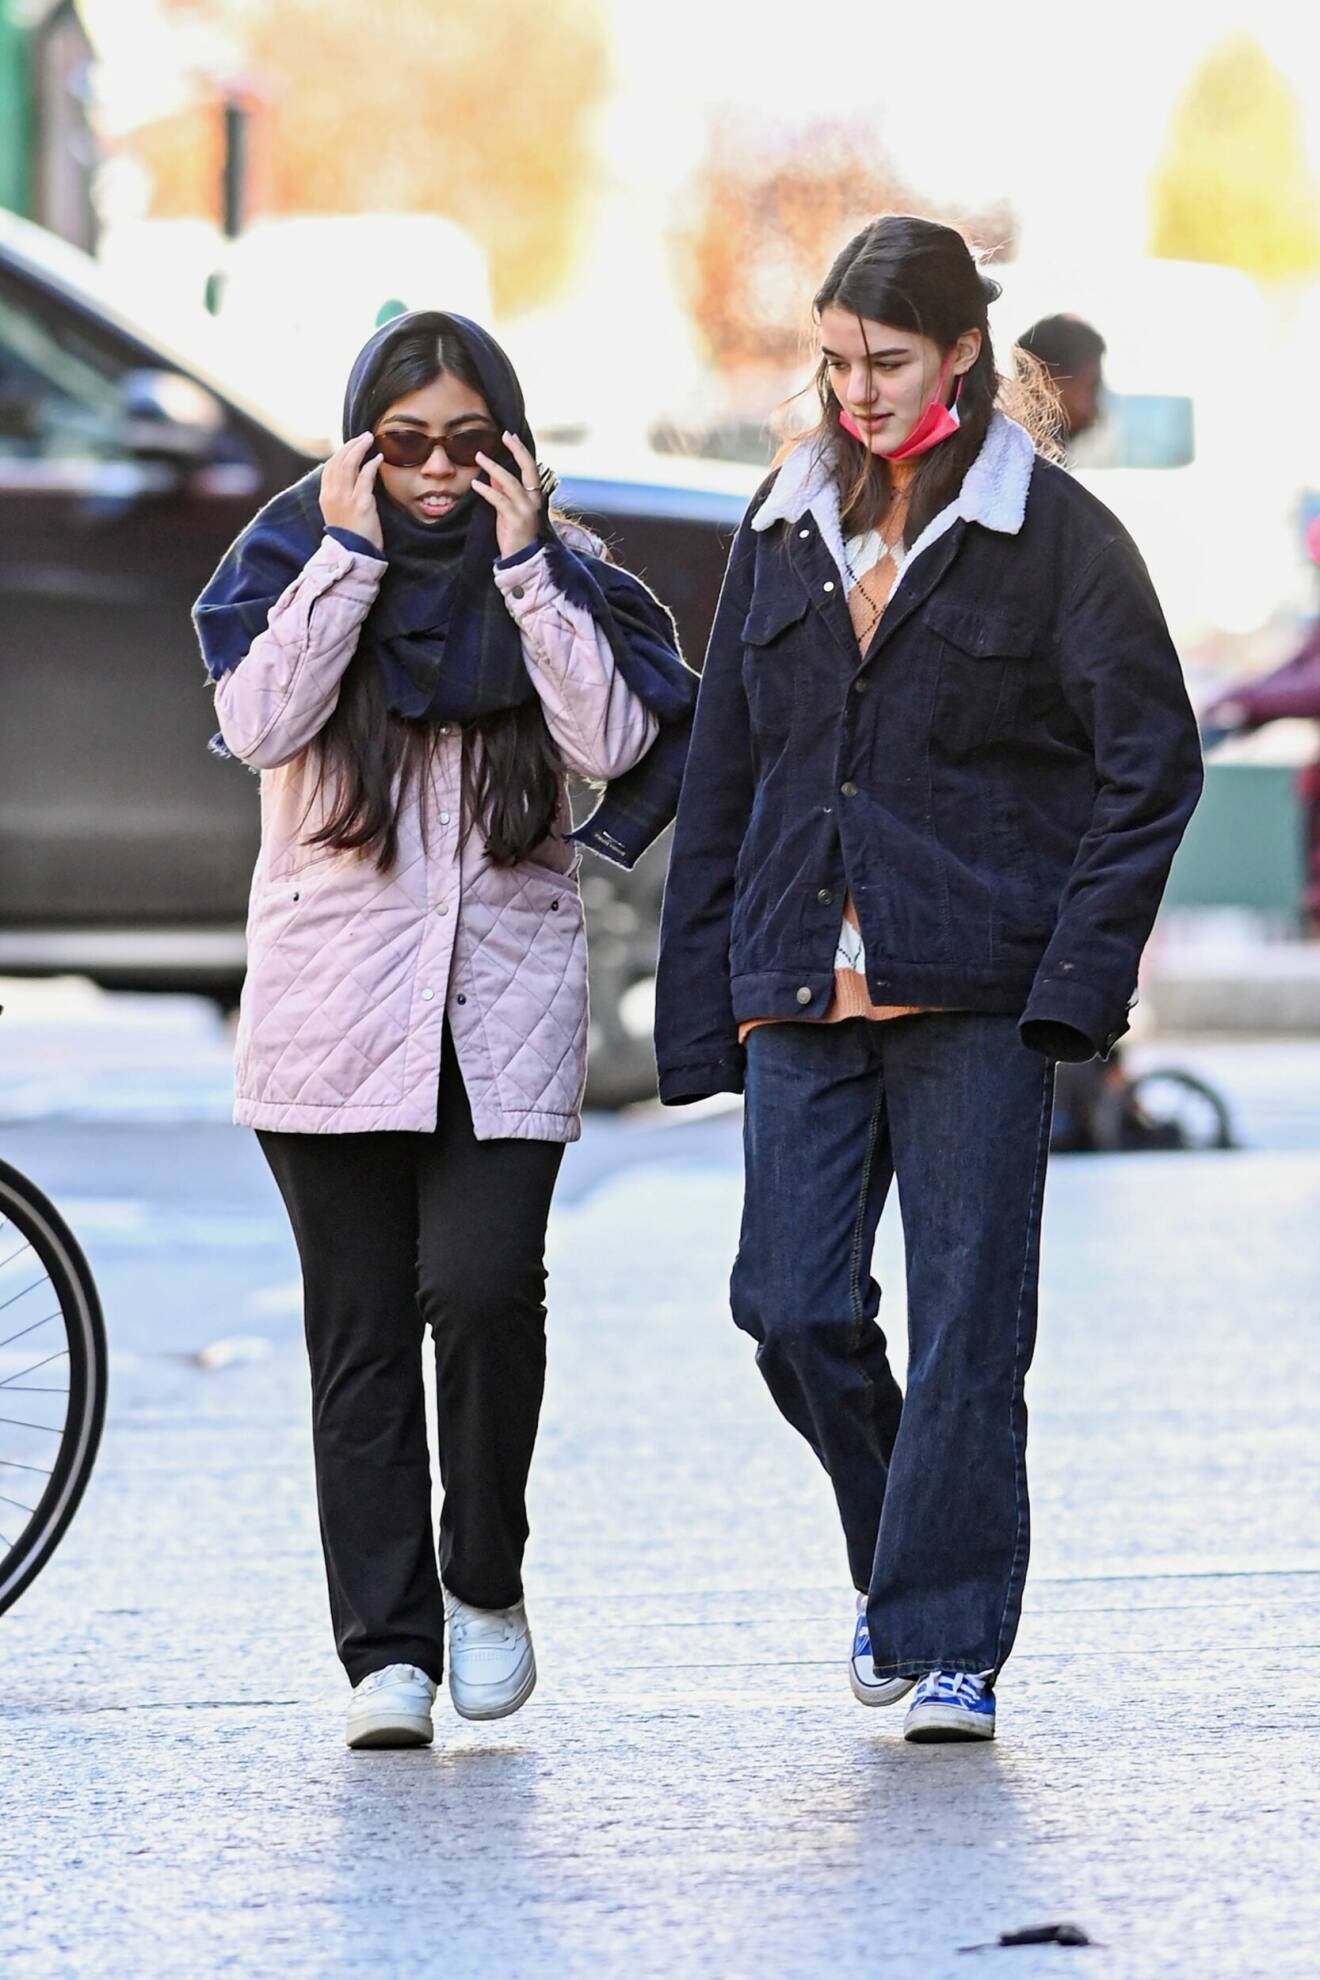 New York, NY - Grown up Suri Cruise is joined by a friend for a friendly stroll through New York City